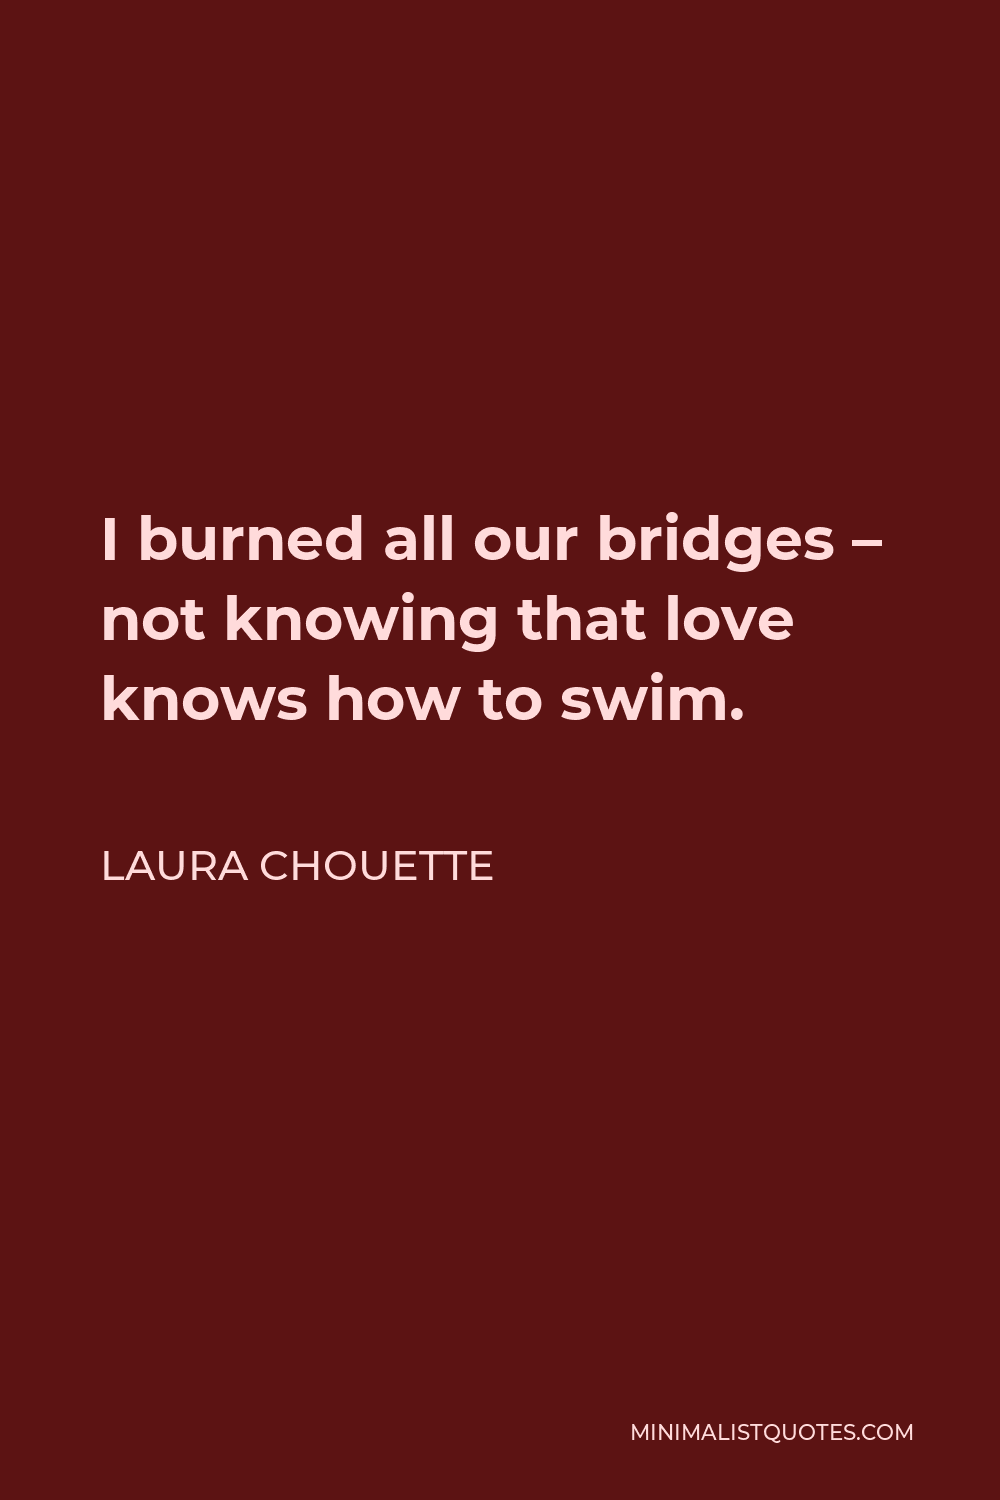 Laura Chouette Quote - I burned all our bridges – not knowing that love knows how to swim.